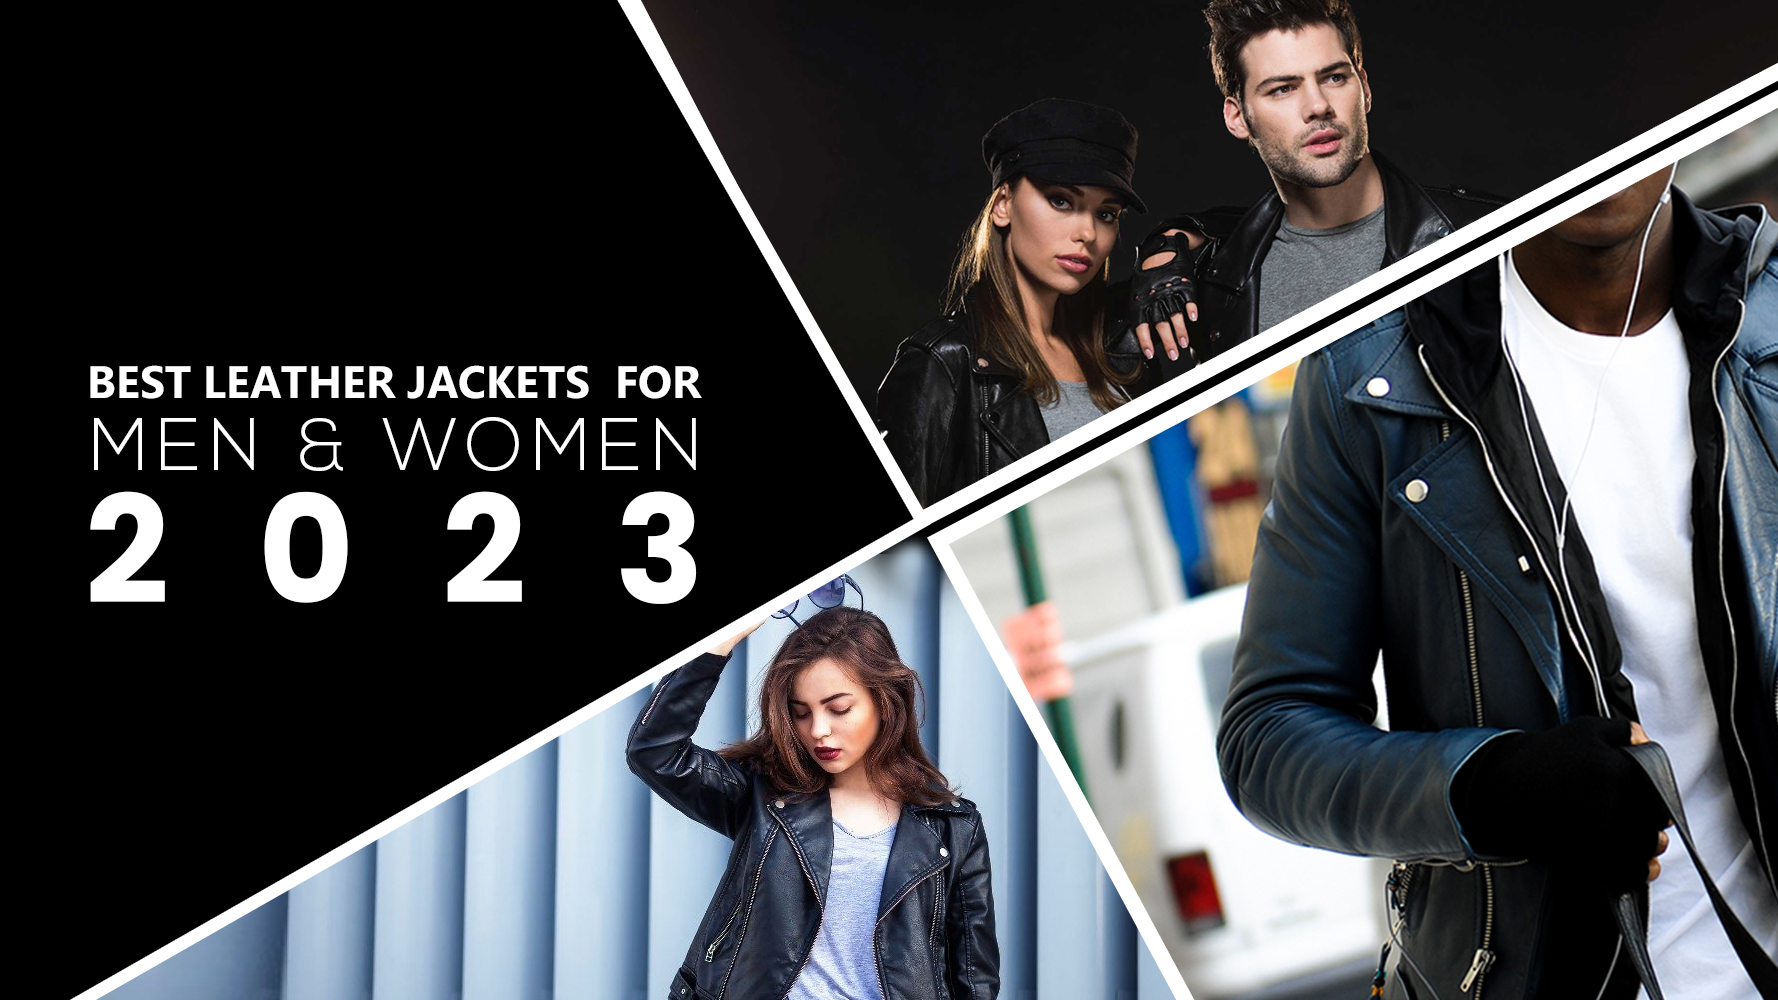 BEST LEATHER JACKETS  FOR MEN & WOMEN TO KEEP AN EYE ON IN 2023